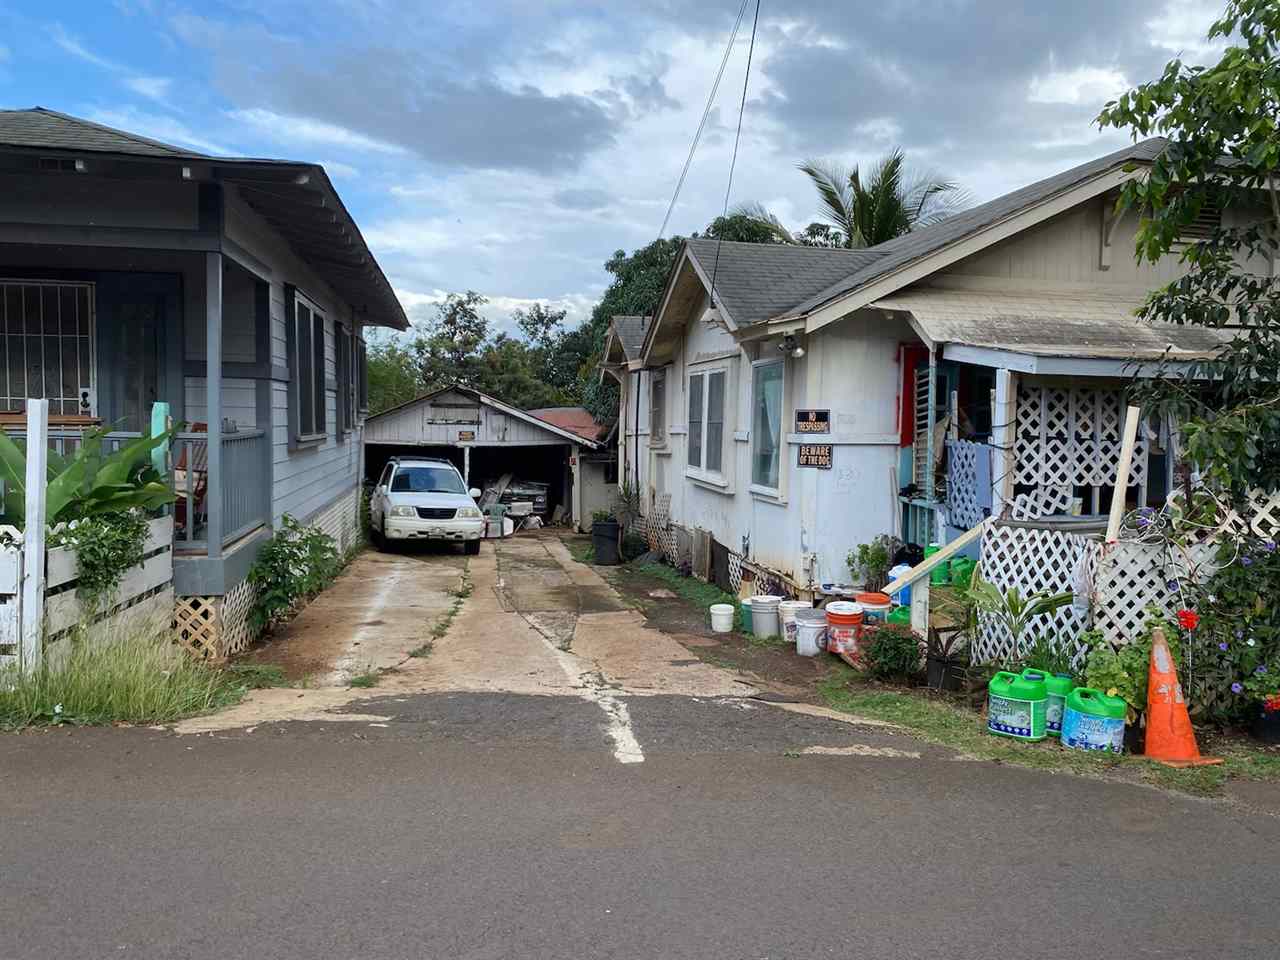 This property is located in the heart of Old Wailuku Town. Built in the 1930'S these plantation style homes are in need of repair and updating. There is also an old carport in the back of the property. 326 Kiele (dark grey) home is a 2 bedroom 1 bath. House  330 Kiele is a 3 bedroom 1 bathroom currently it  has no water meter connection or electricity connection. 330 Kiele will not be shown due to concerns over the structural safety of the home. PLEASE DO NOT DISTURB TENANTS.